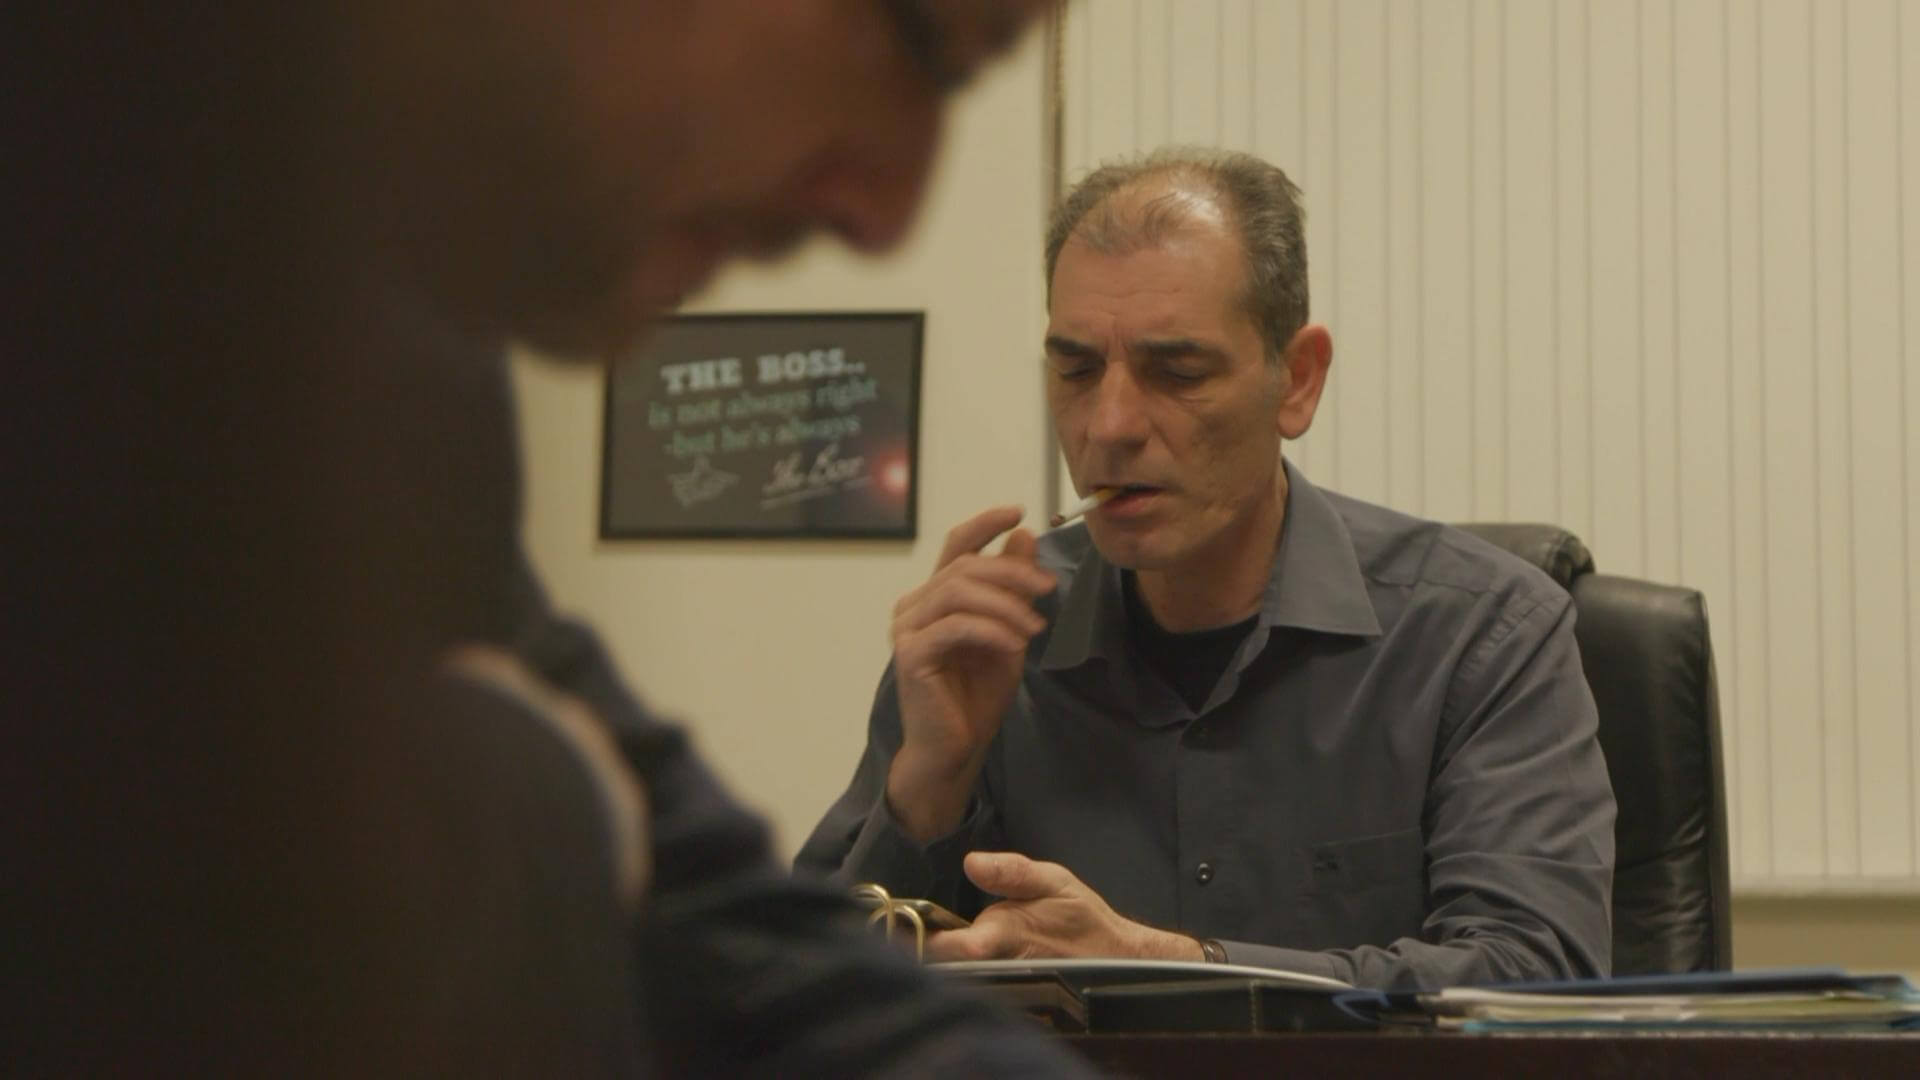 Still from Number 387. A man is sitting at a desk smoking a cigarette and holding a cell phone. There is an out of focus person in the foreground.